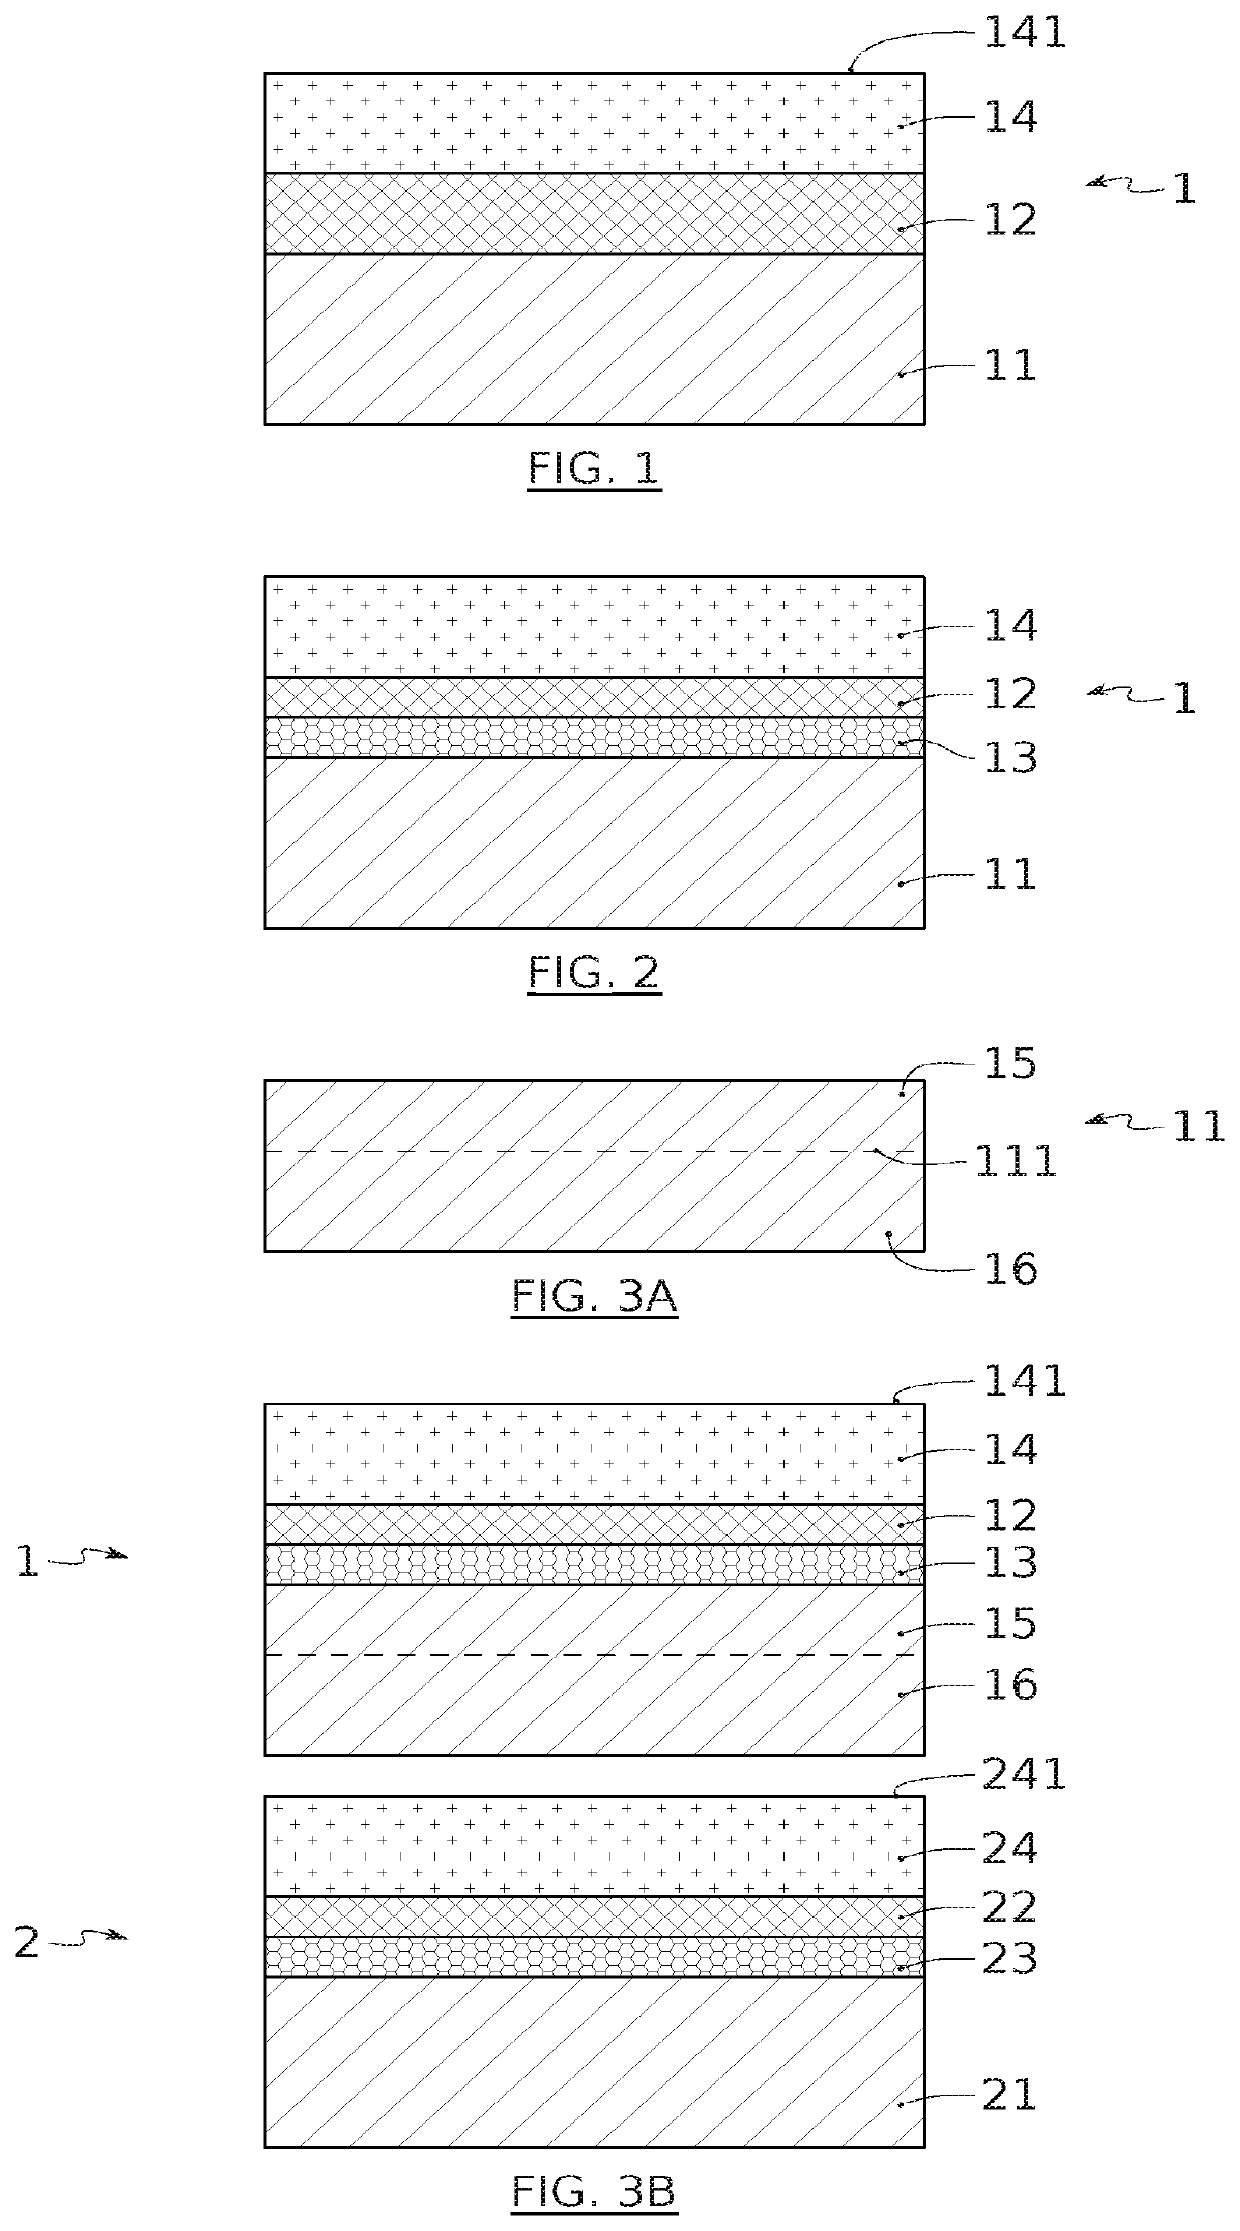 Method of manufacturing an electronic device